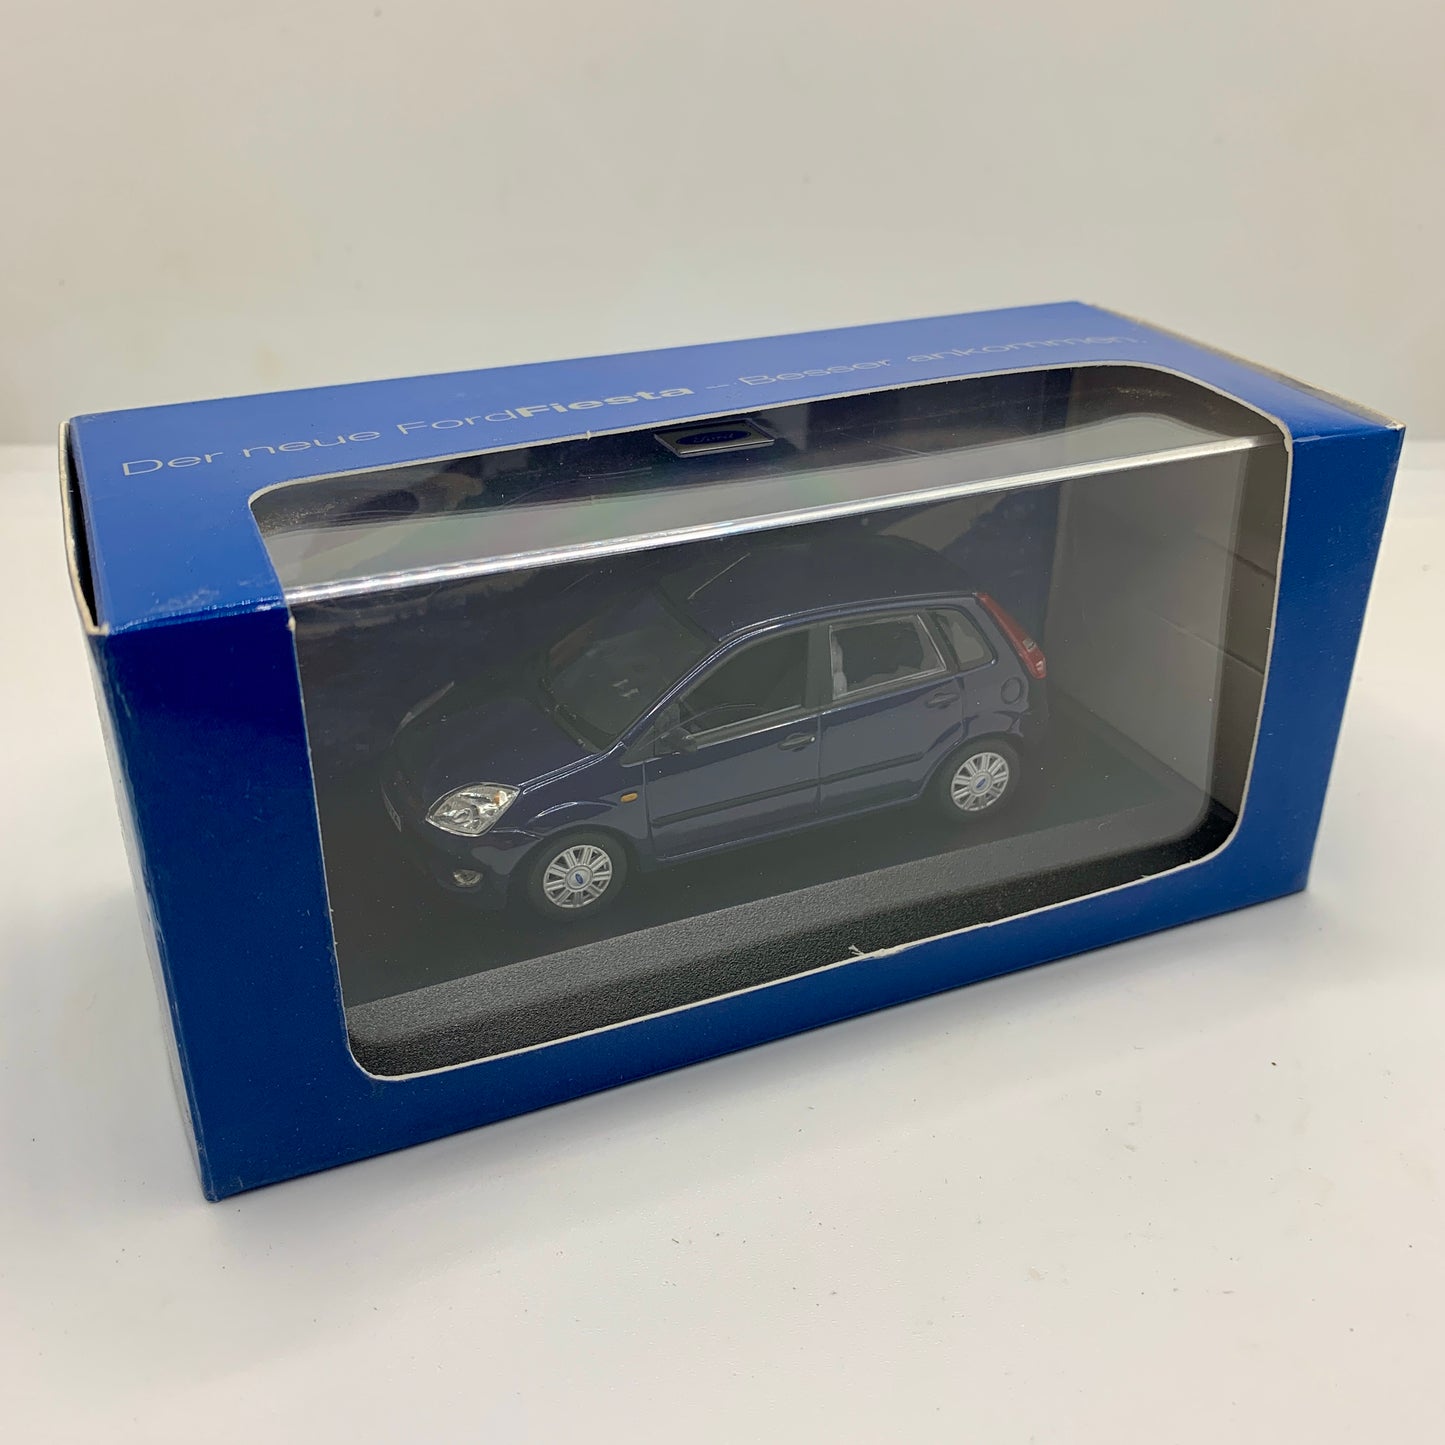 Iconic Ford Fiesta Collectable Classic Cars 1/43 Scale